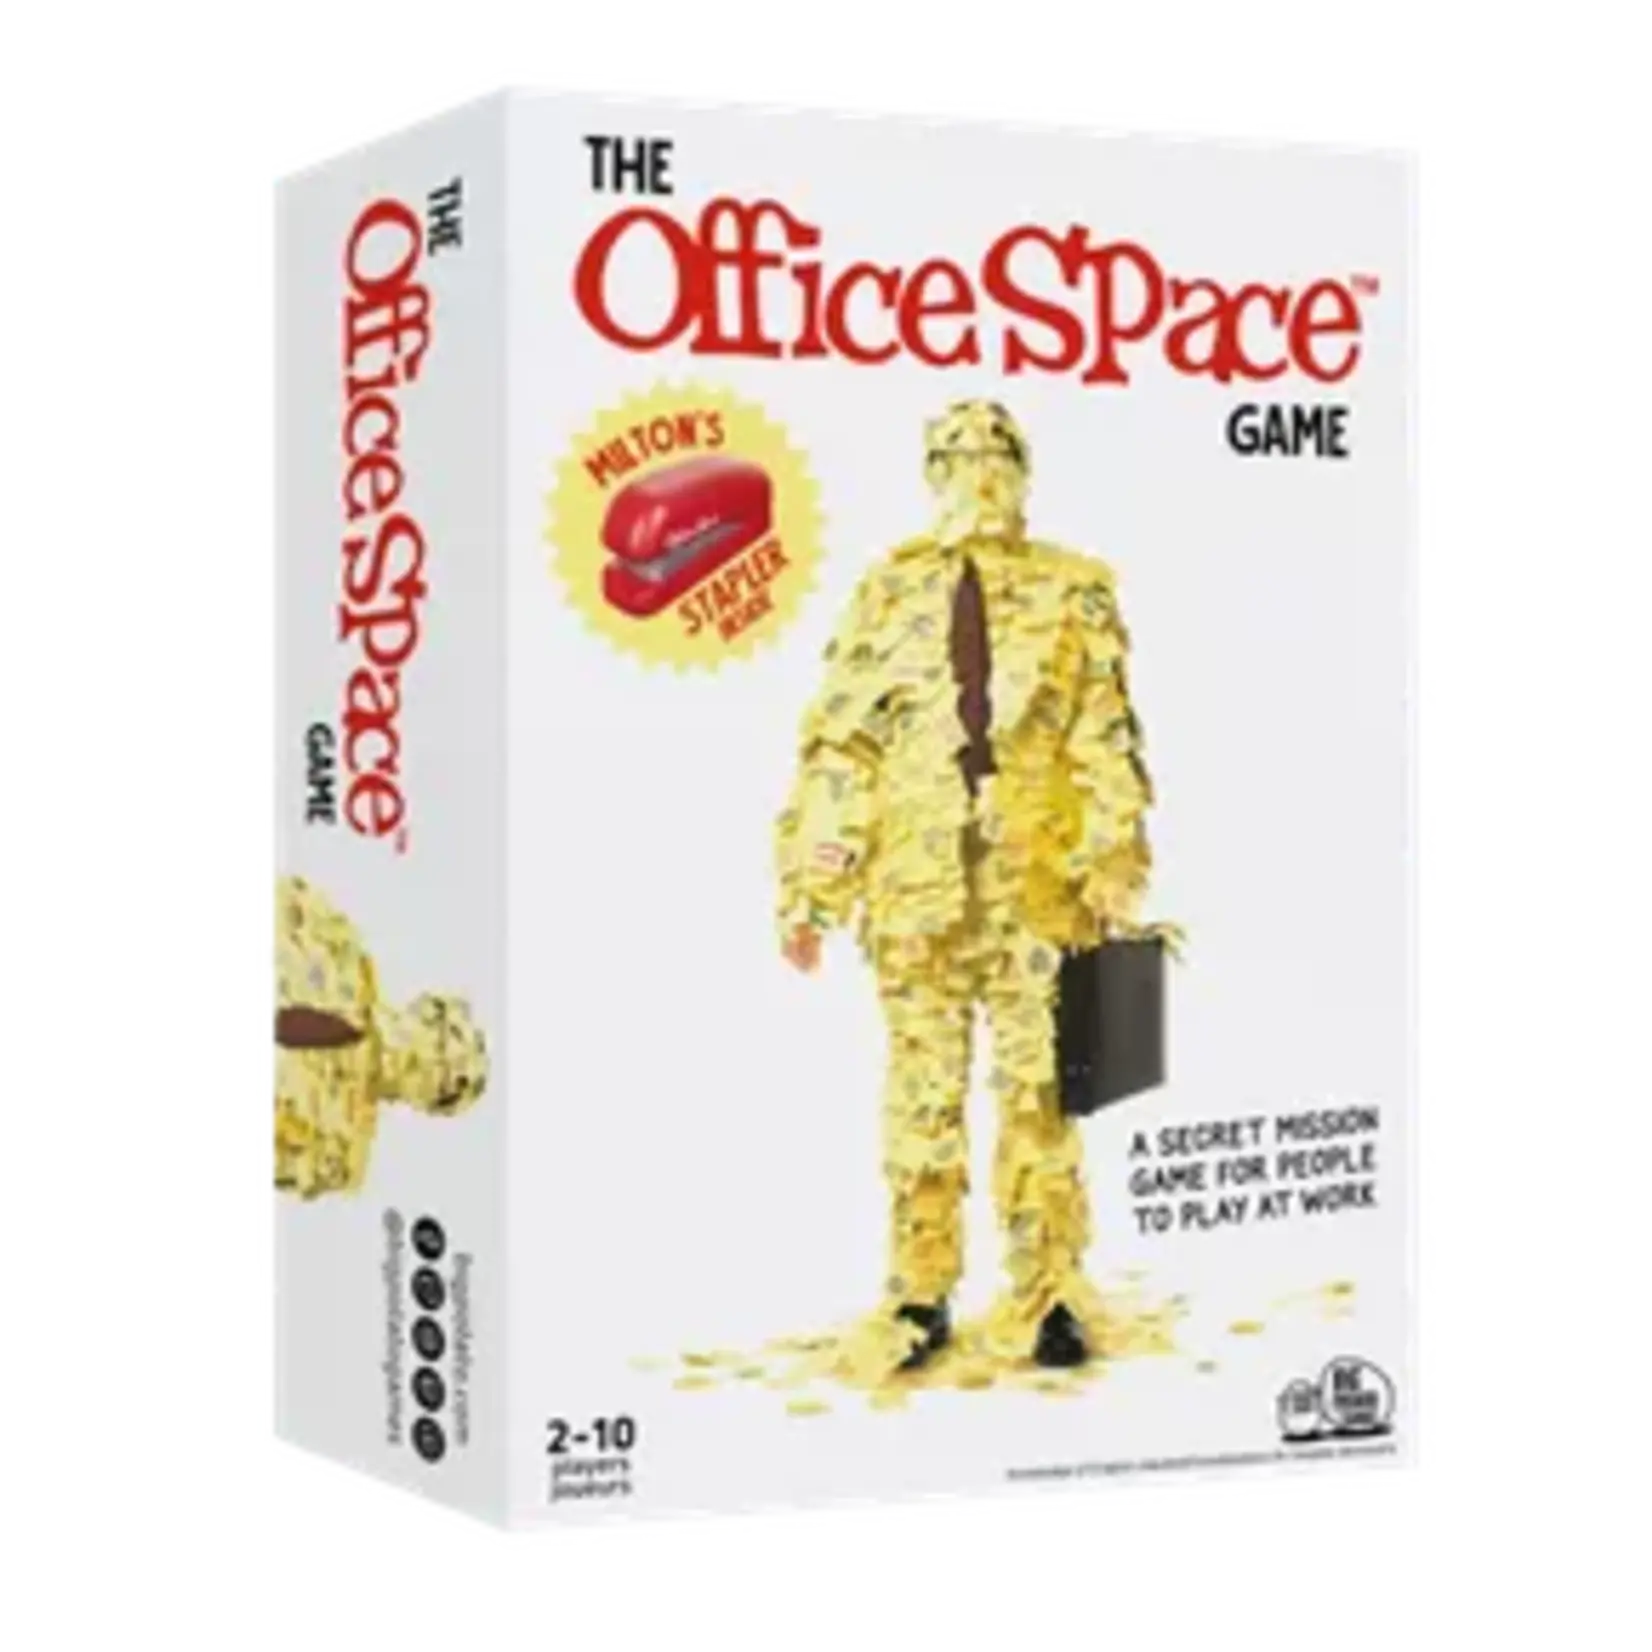 Big Potato Games The Office Space Game